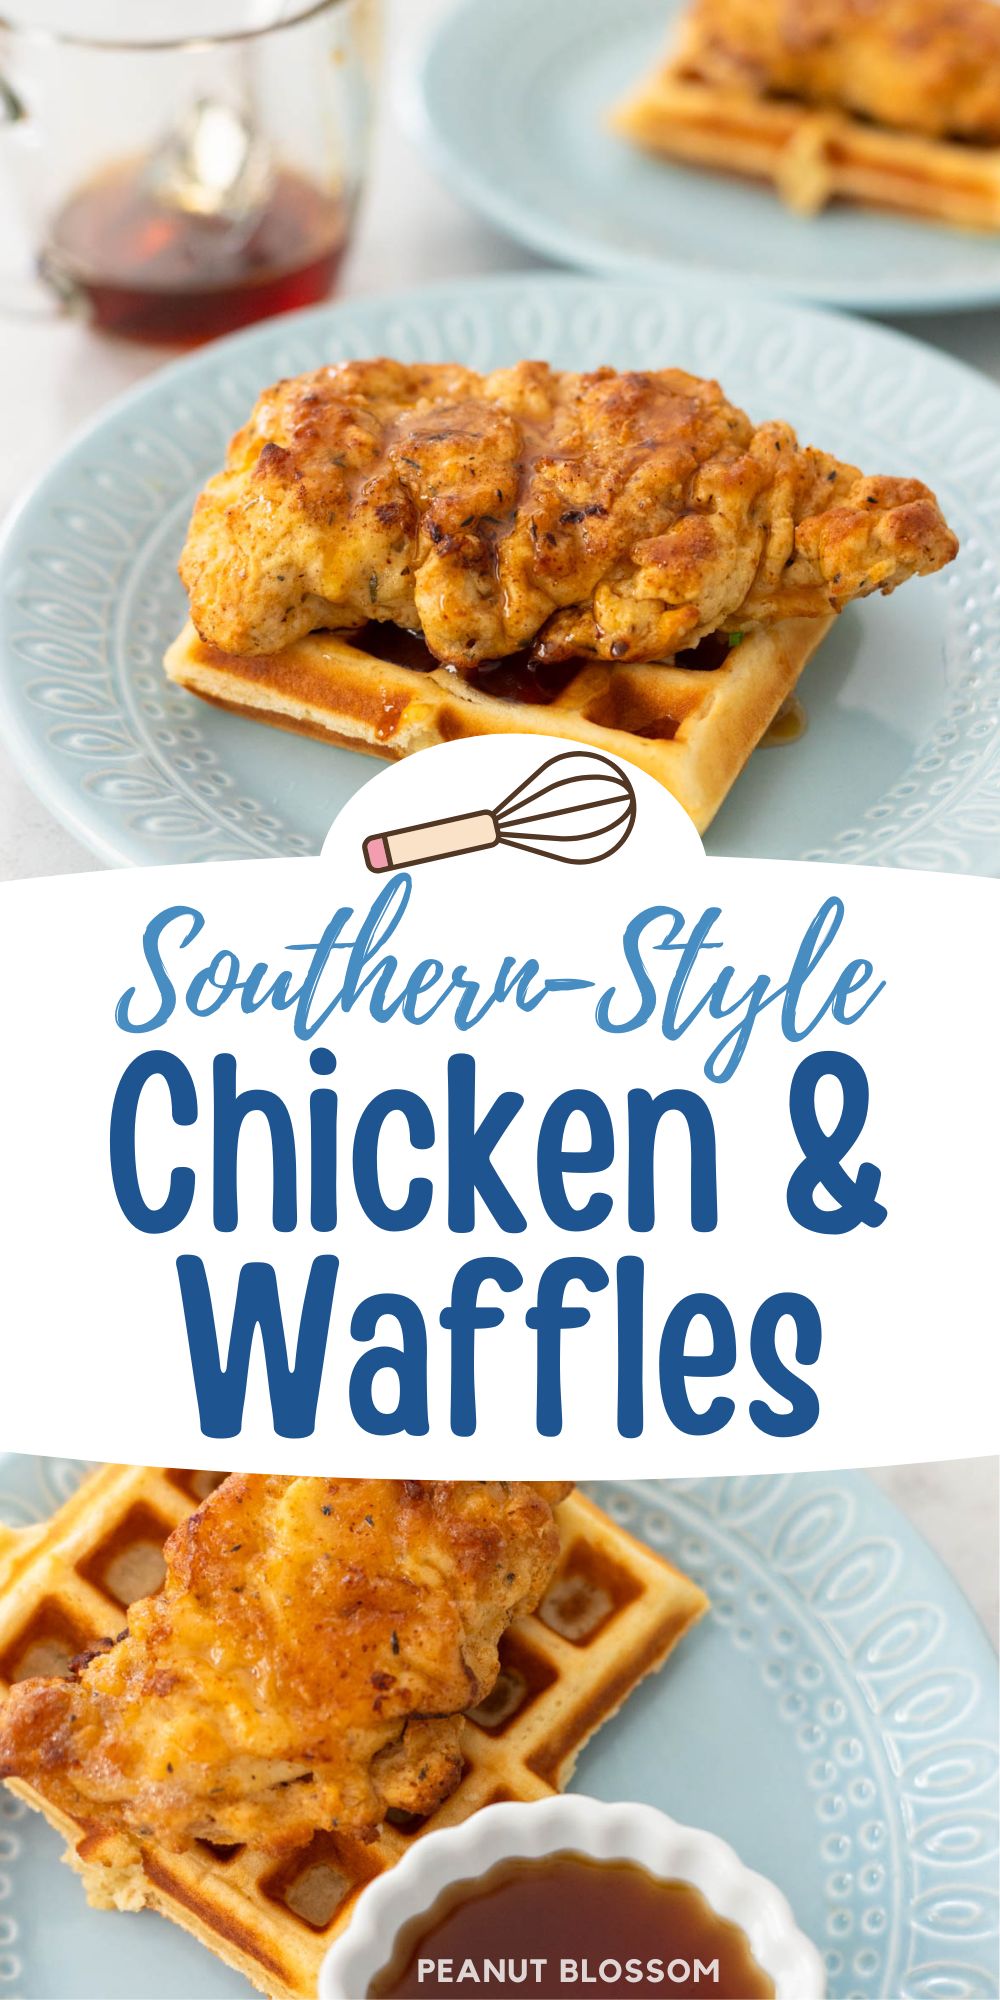 The photo collage shows two angles of the chicken and waffles on a blue plate.